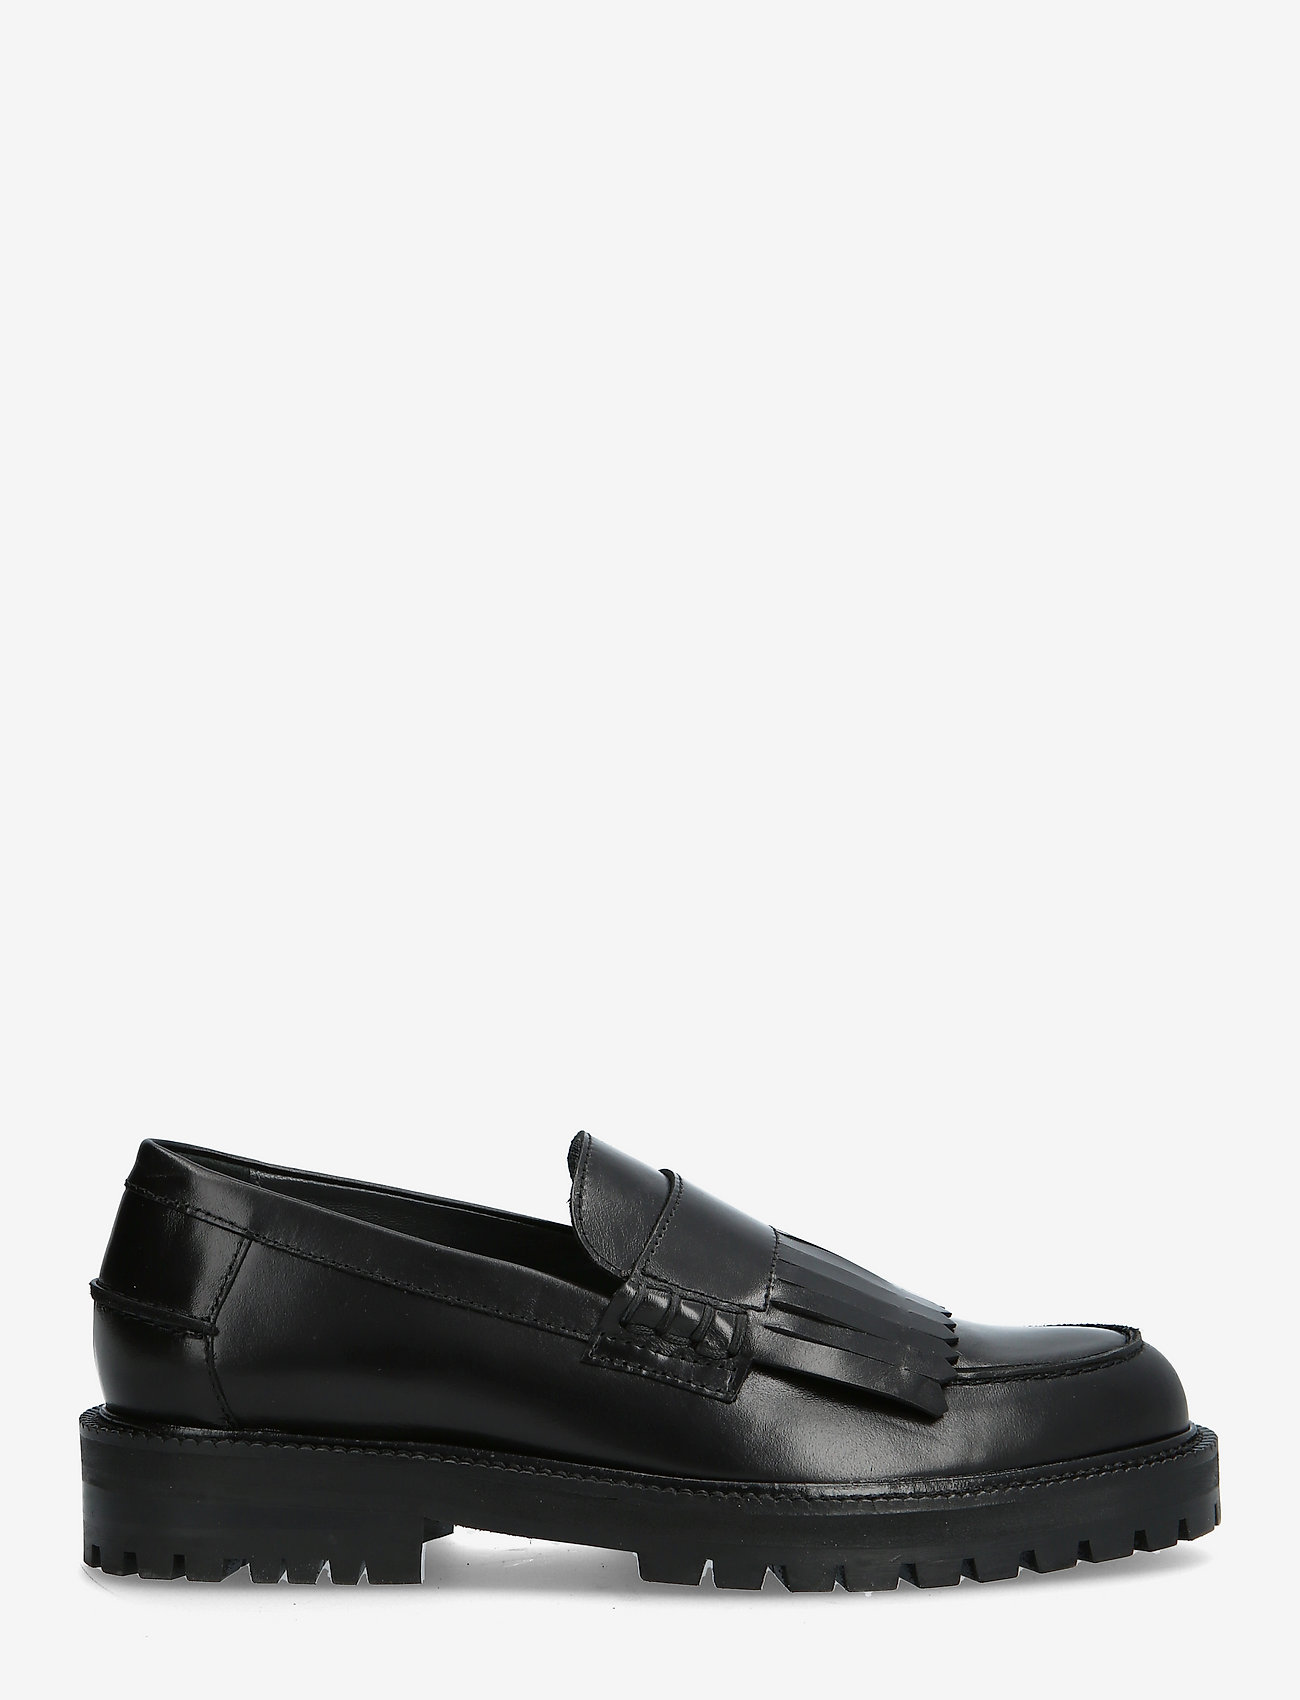 ANGULUS - Loafer - birthday gifts - 1835 black - 1